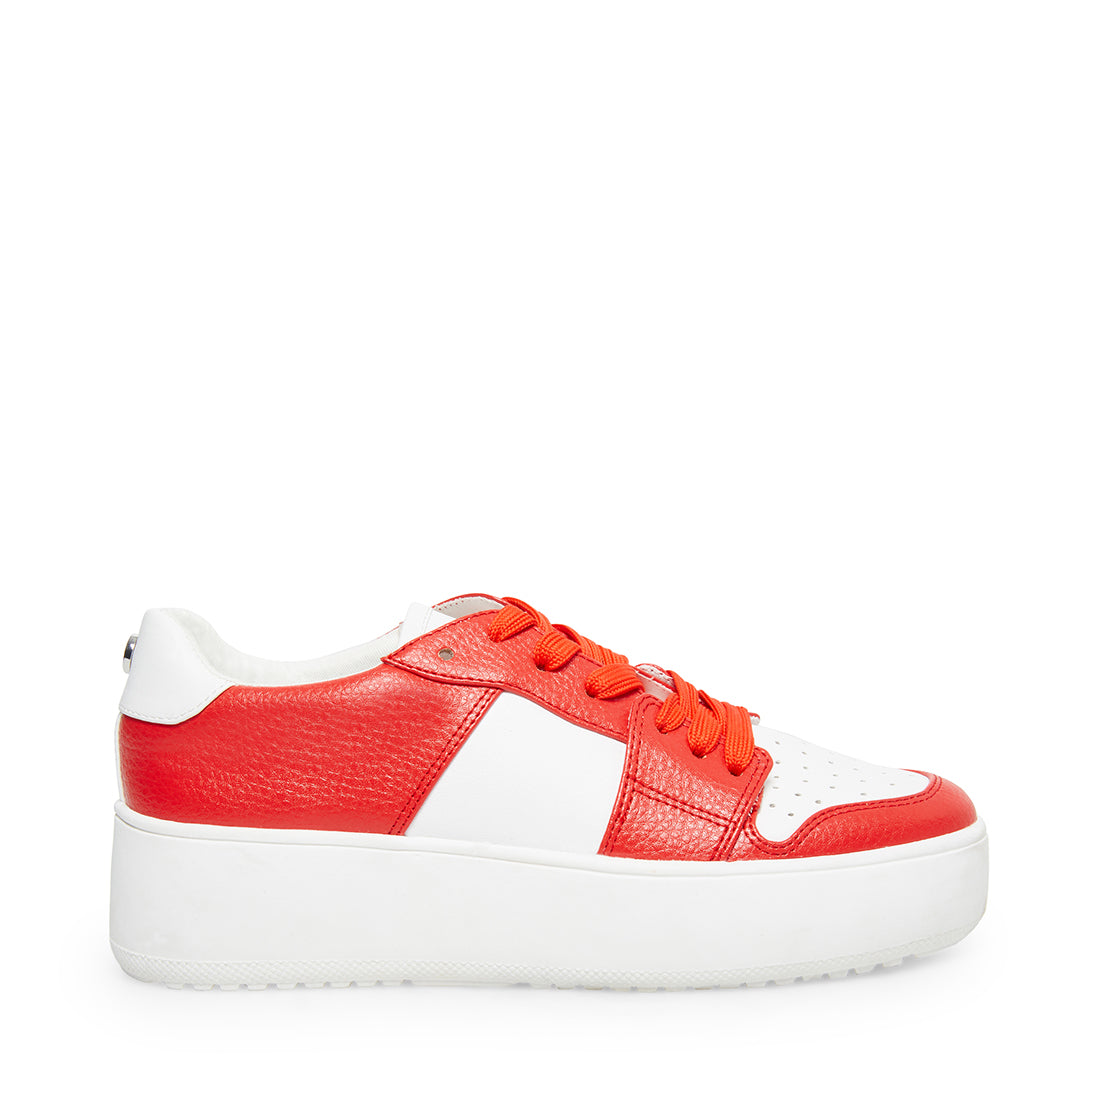 steve madden red tennis shoes